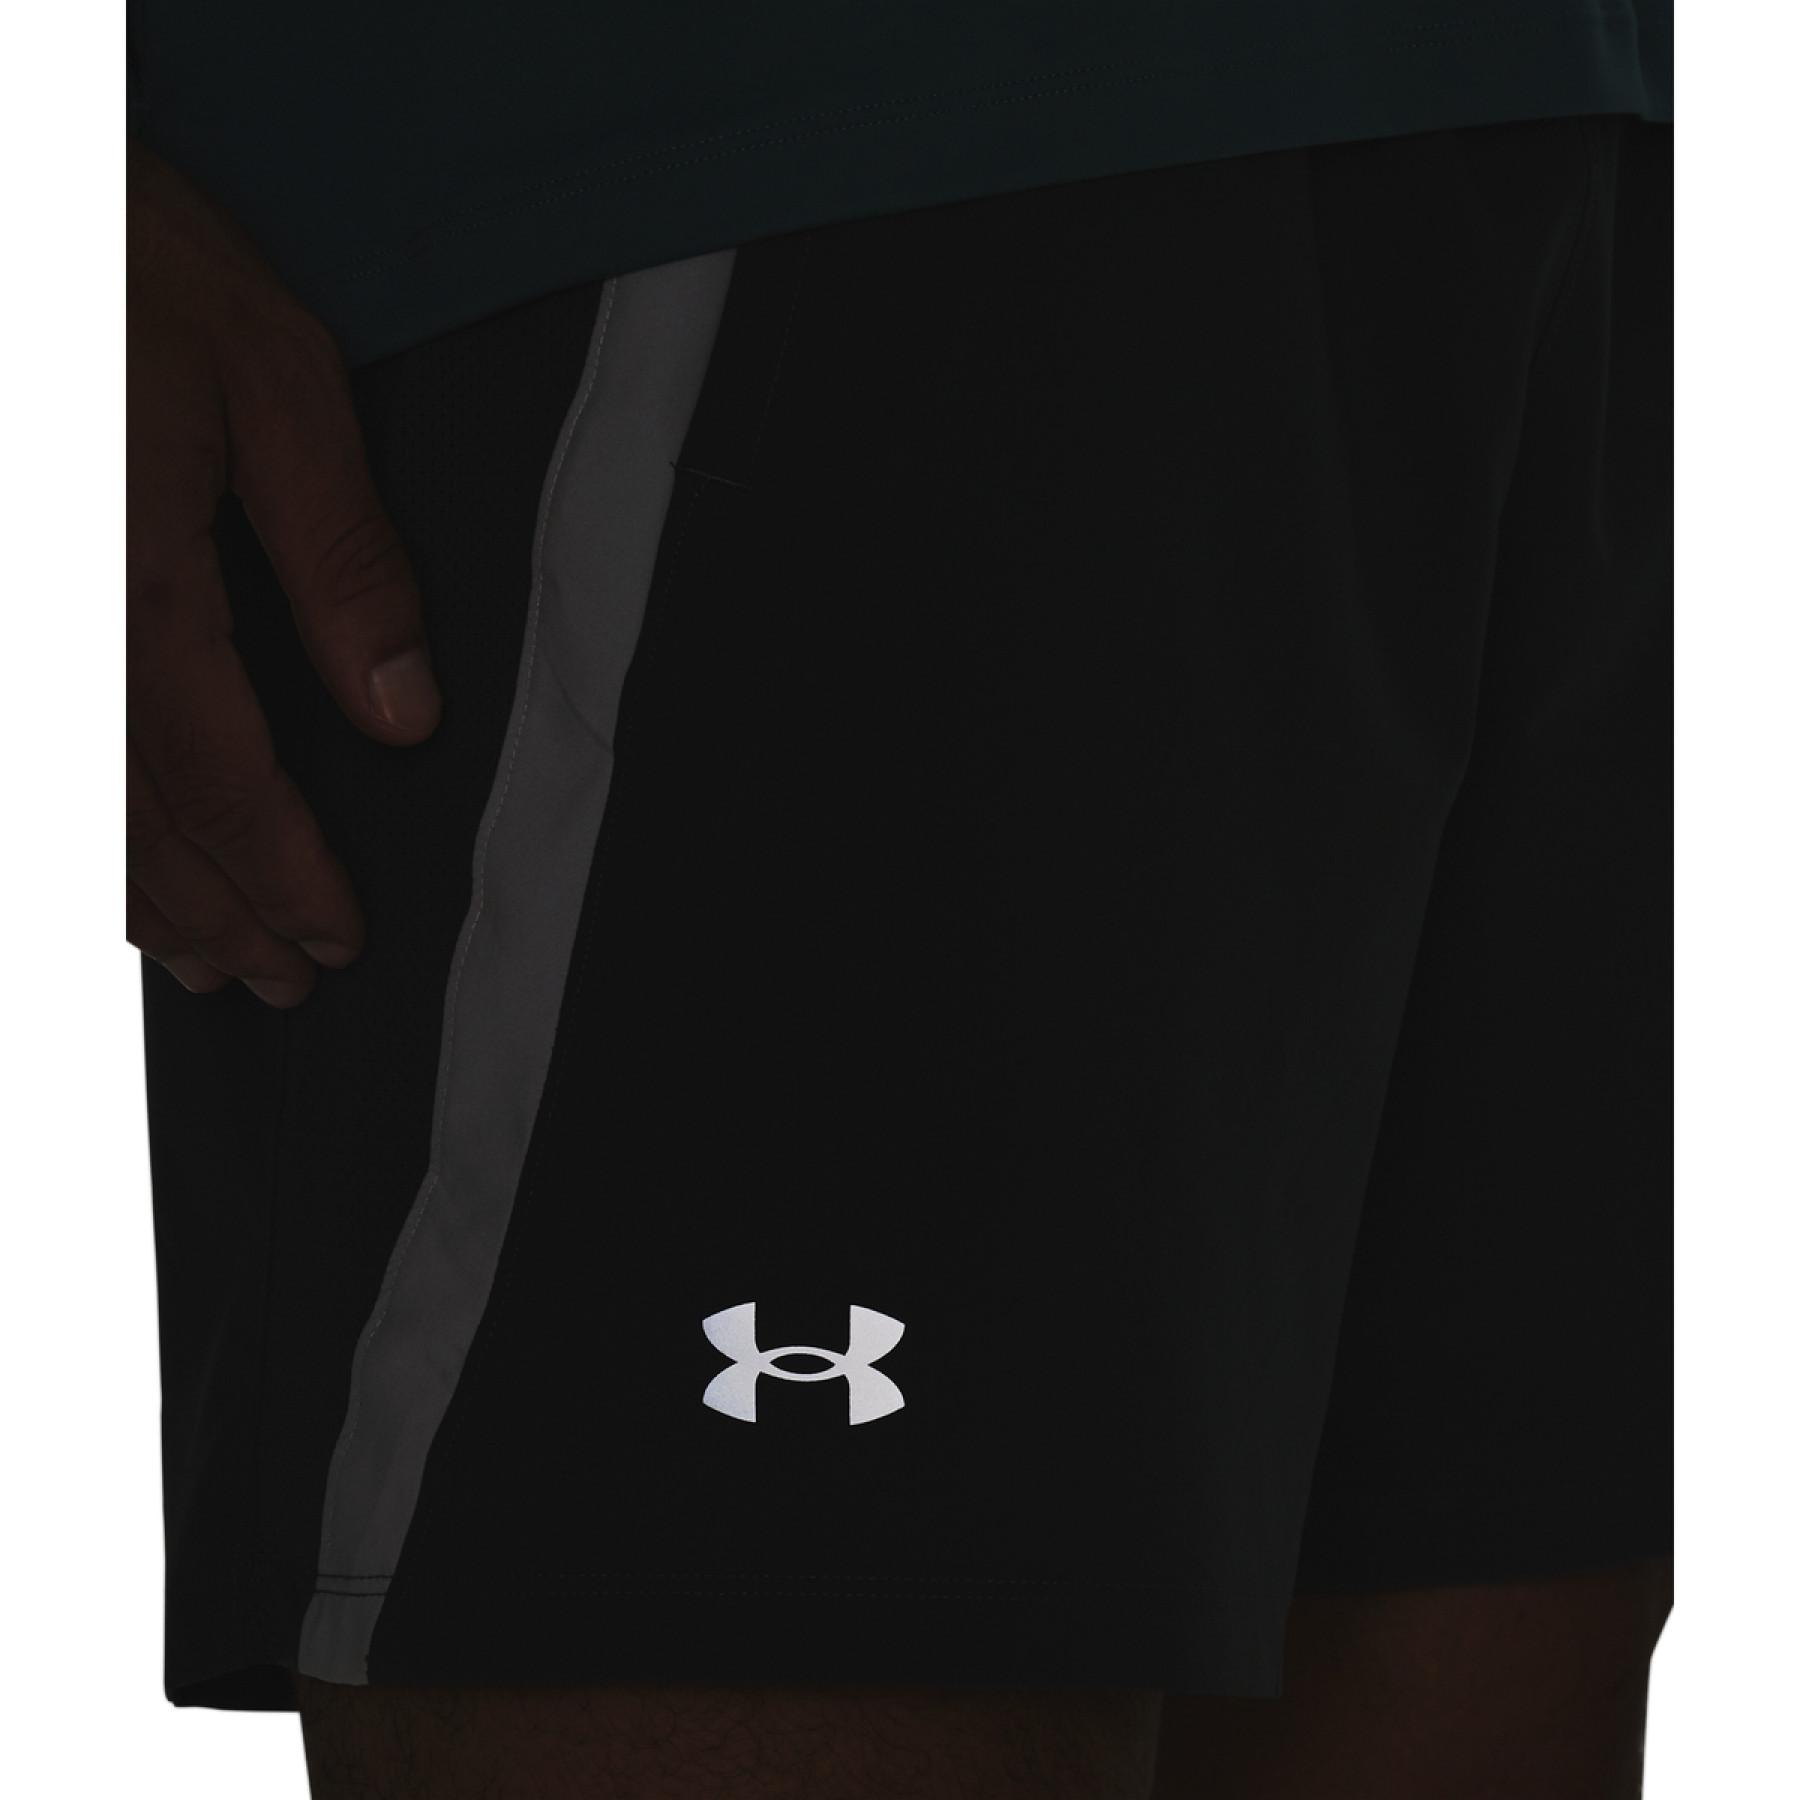 Short Under Armour 18 cm Launch SW Branded